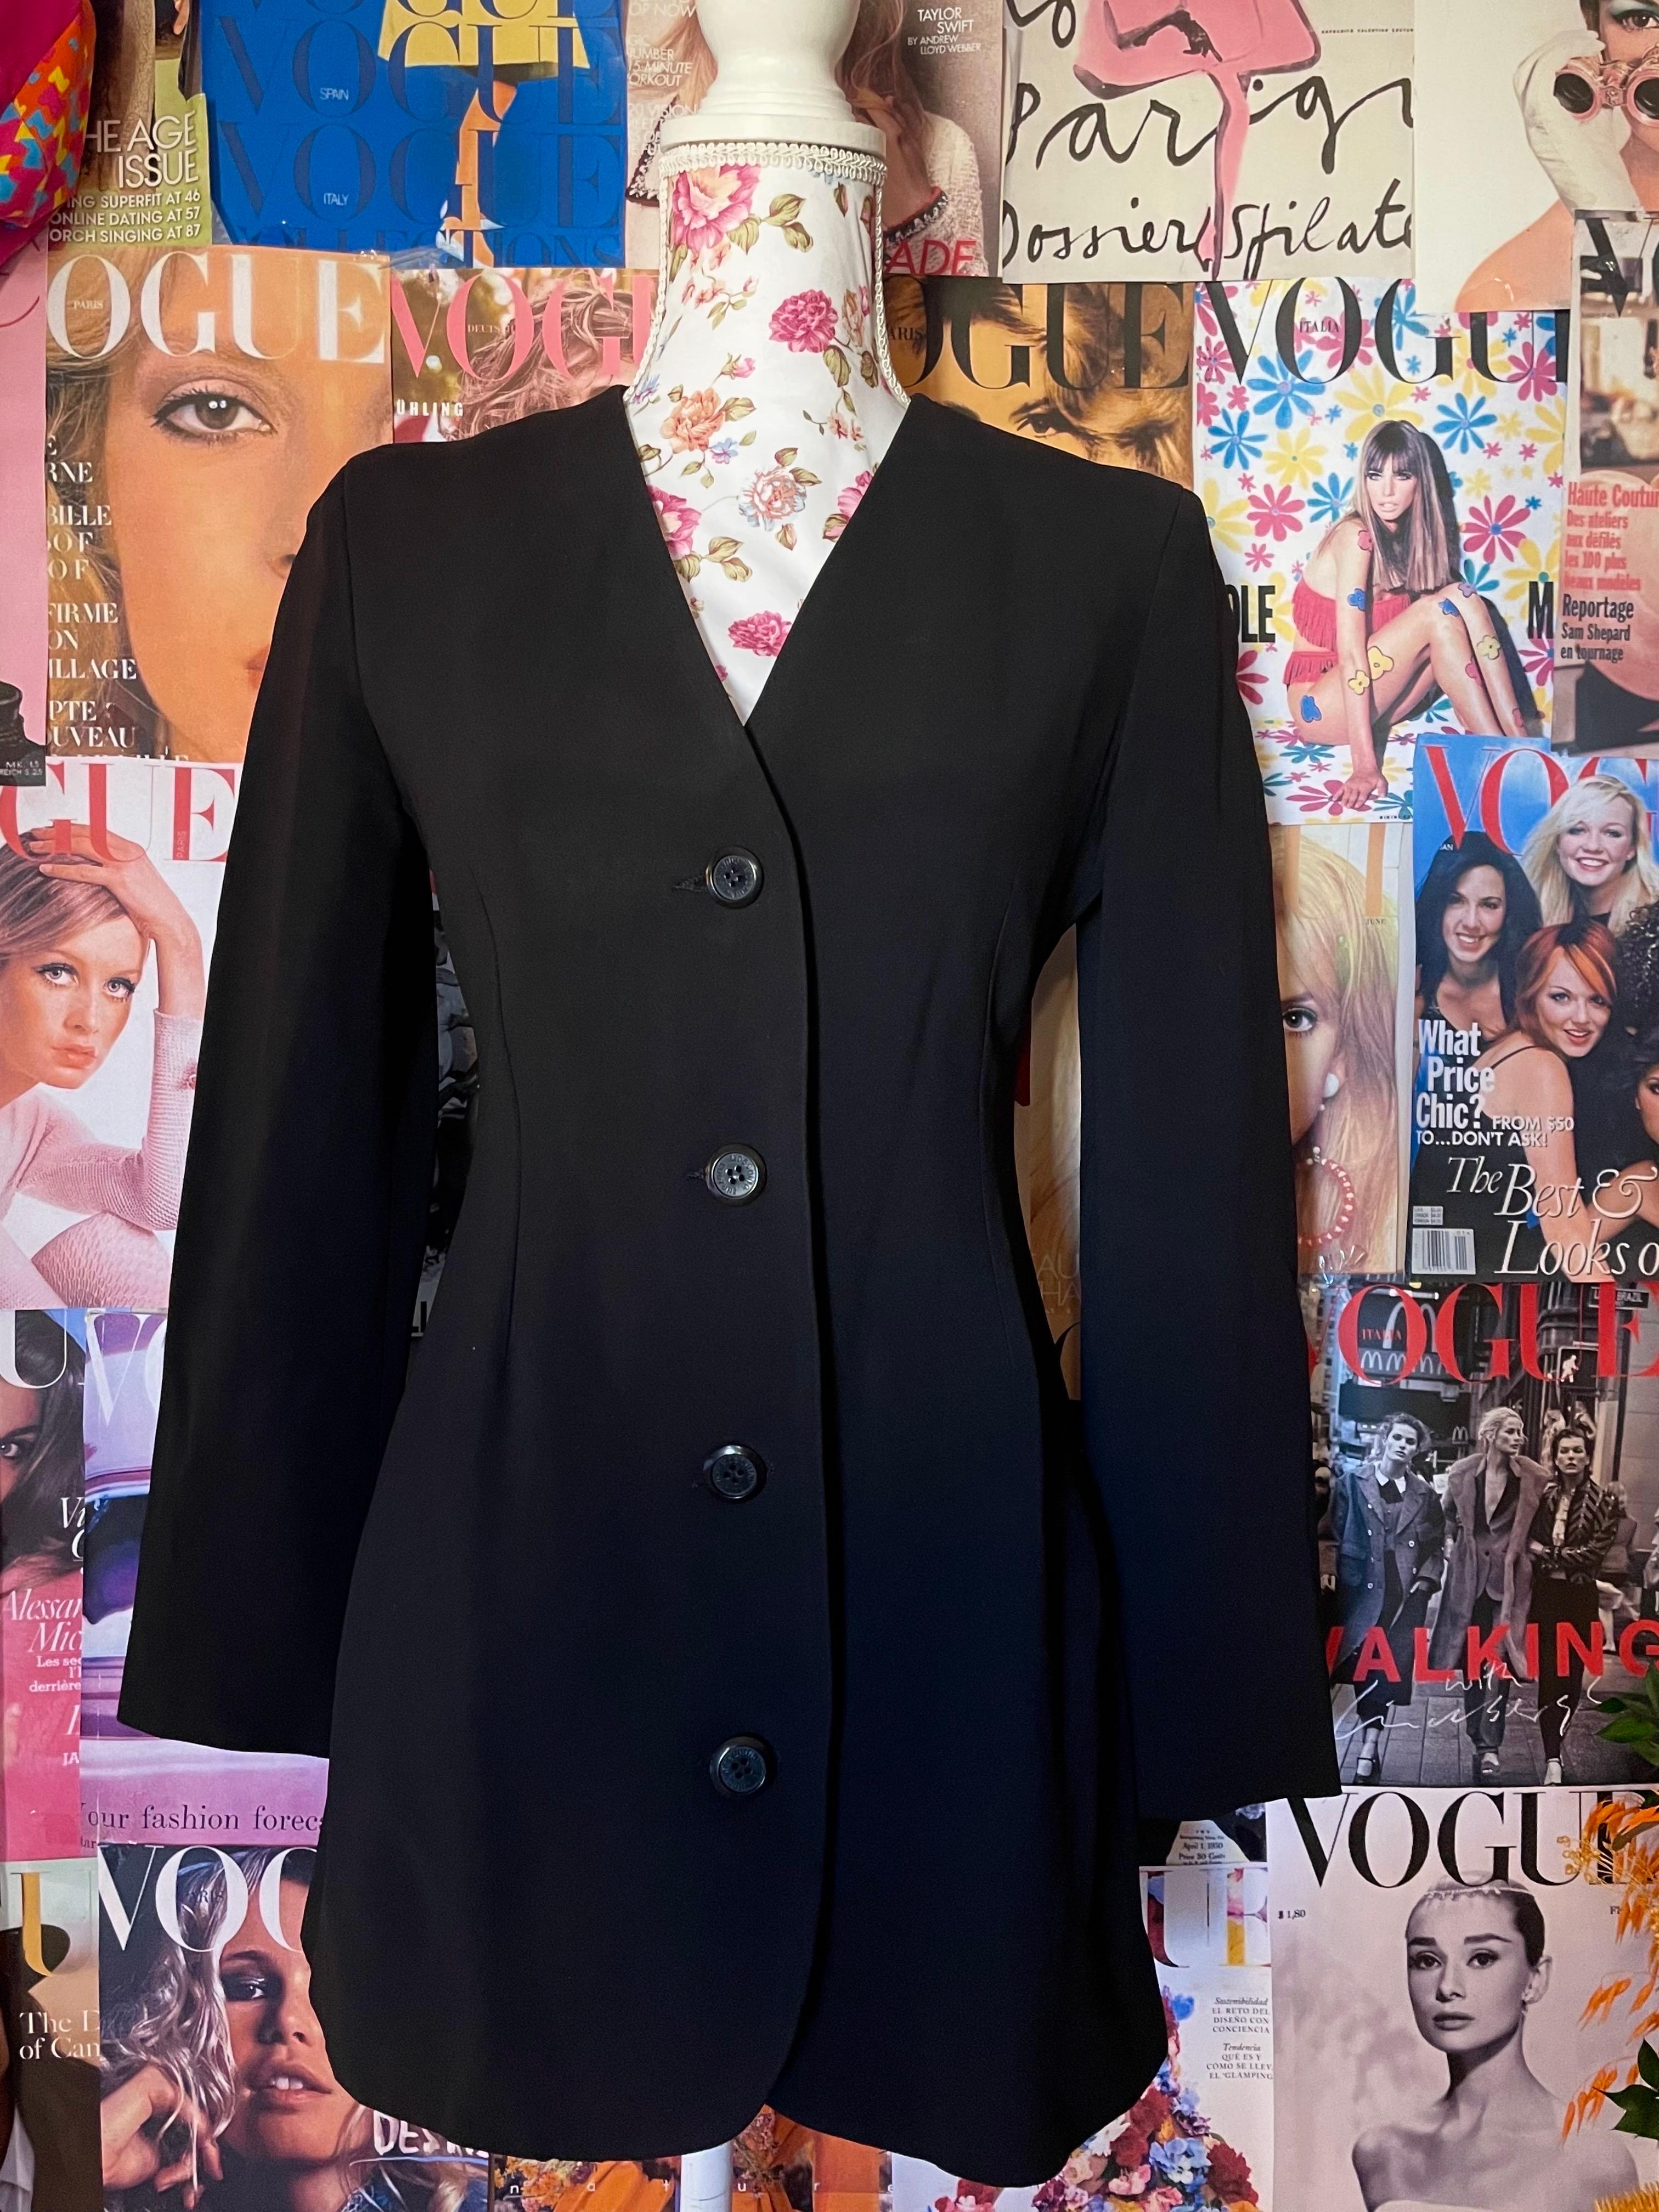 1990's Vintage Moschino Couture Black blazer jacket. in perfect condition.  


Sizes
 I 42 
Fr 38
US 8
UK 10 

Measurements : 

JACKET :

Shoulders  : 39 cm 
Waist : 35 cm 
Sleeves : 55 cm
Bust 42 cm
Length 73 cm



Please make sure you know and